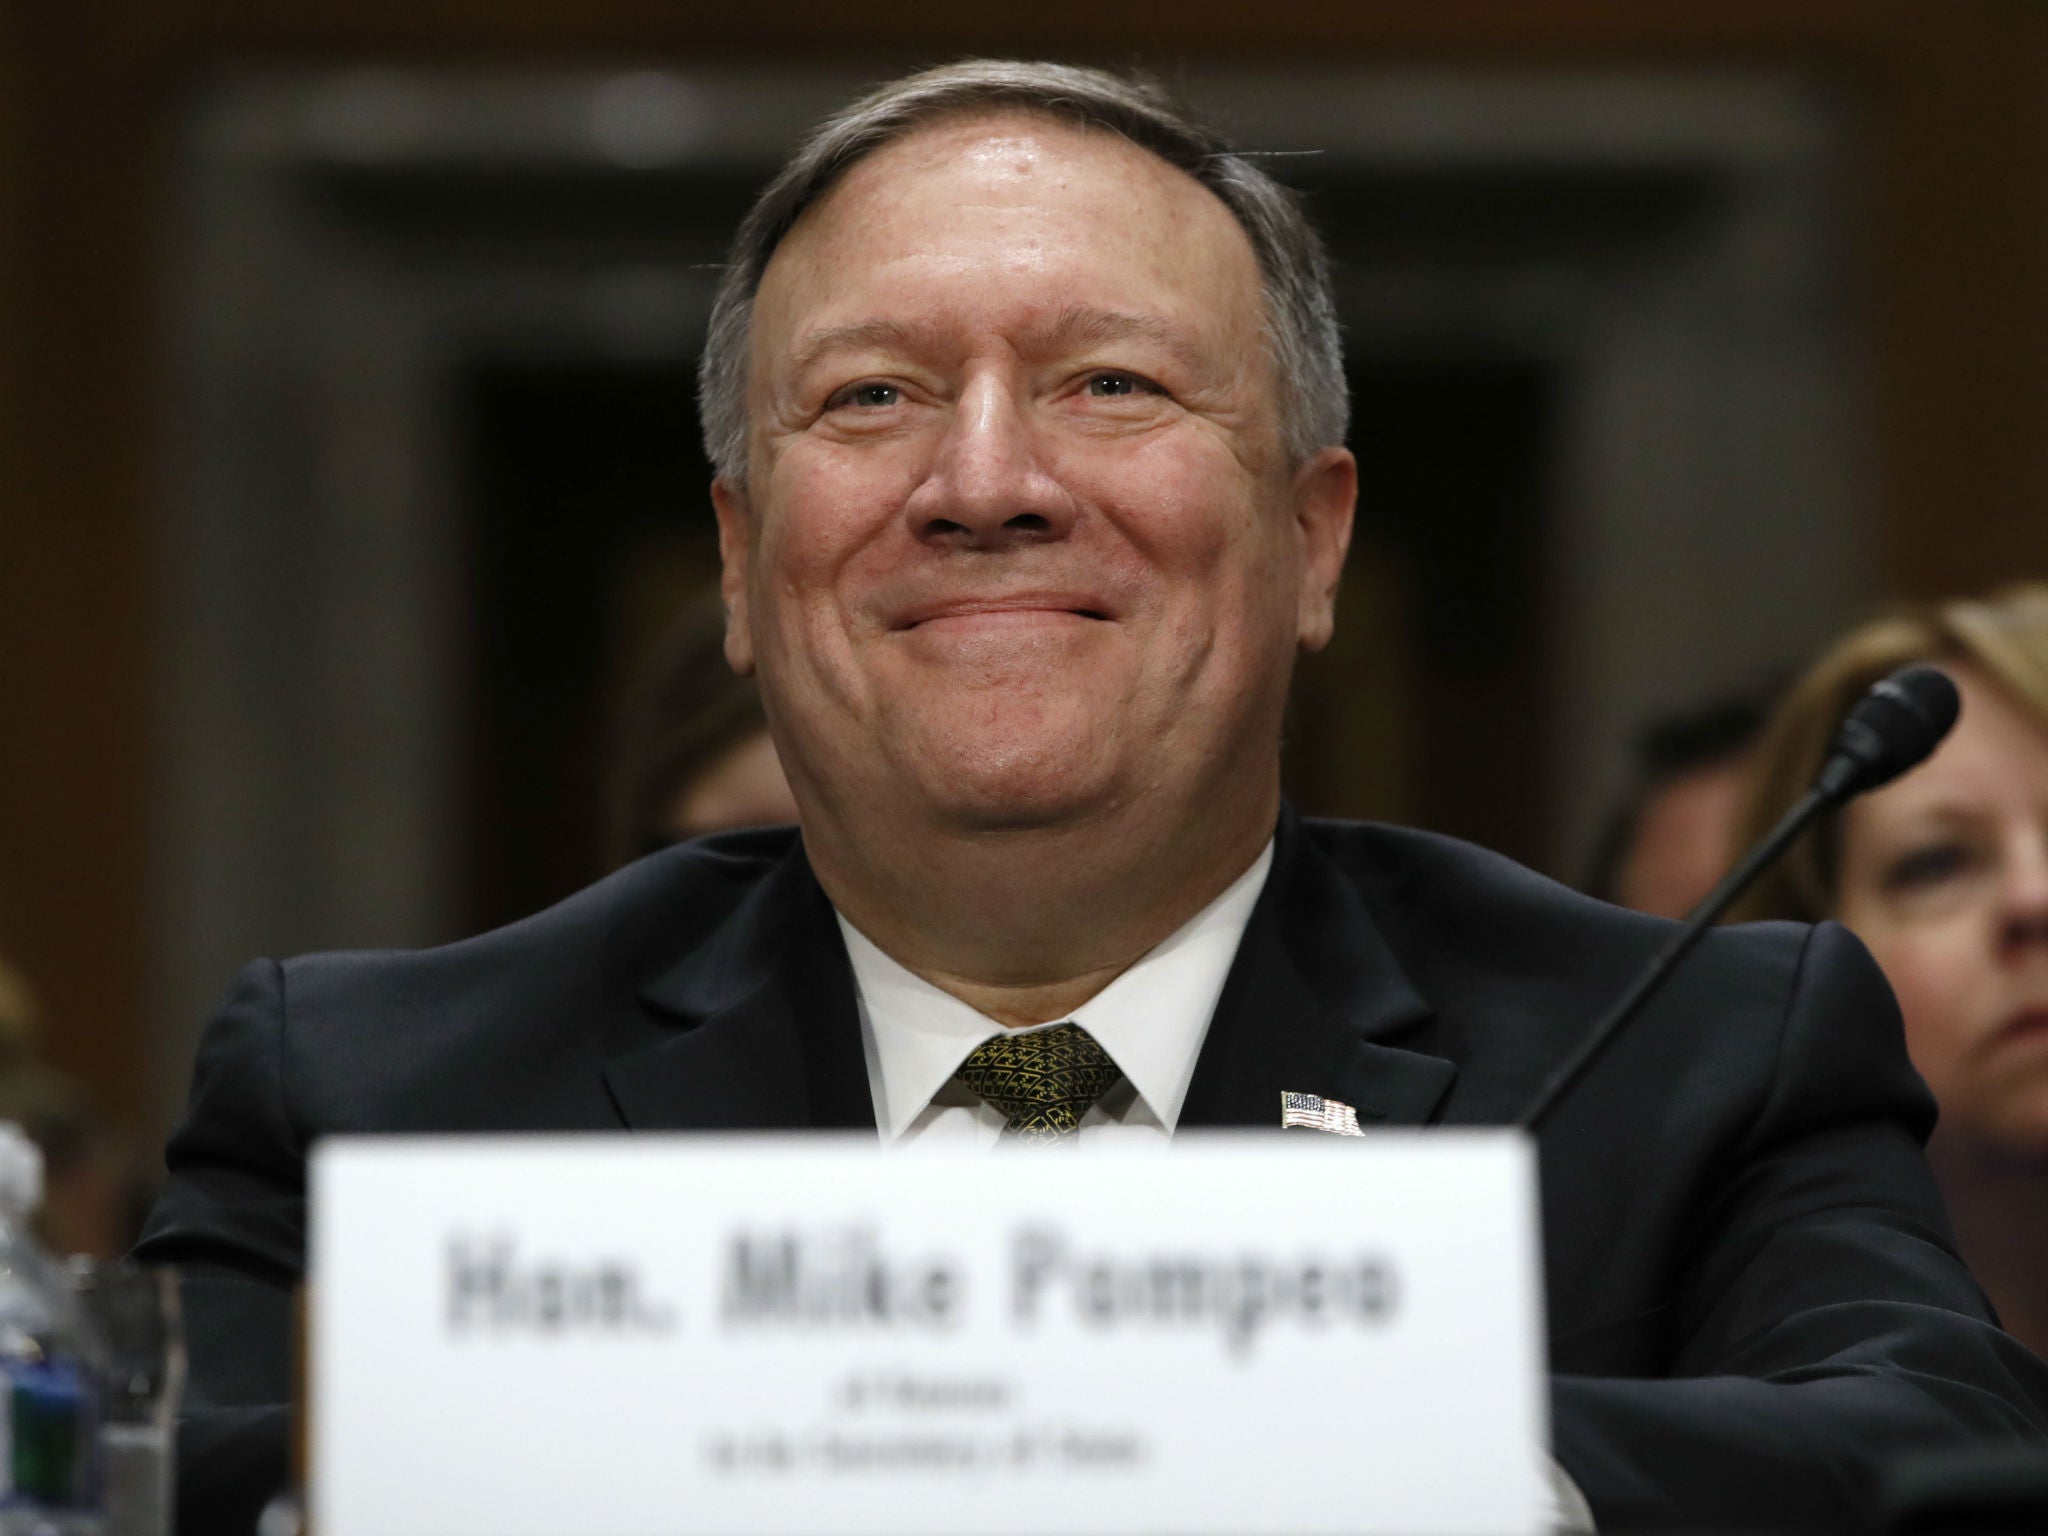 Secretary of State-designate Mike Pompeo smiles after his introduction before the Senate Foreign Relations Committee during a confirmation hearing